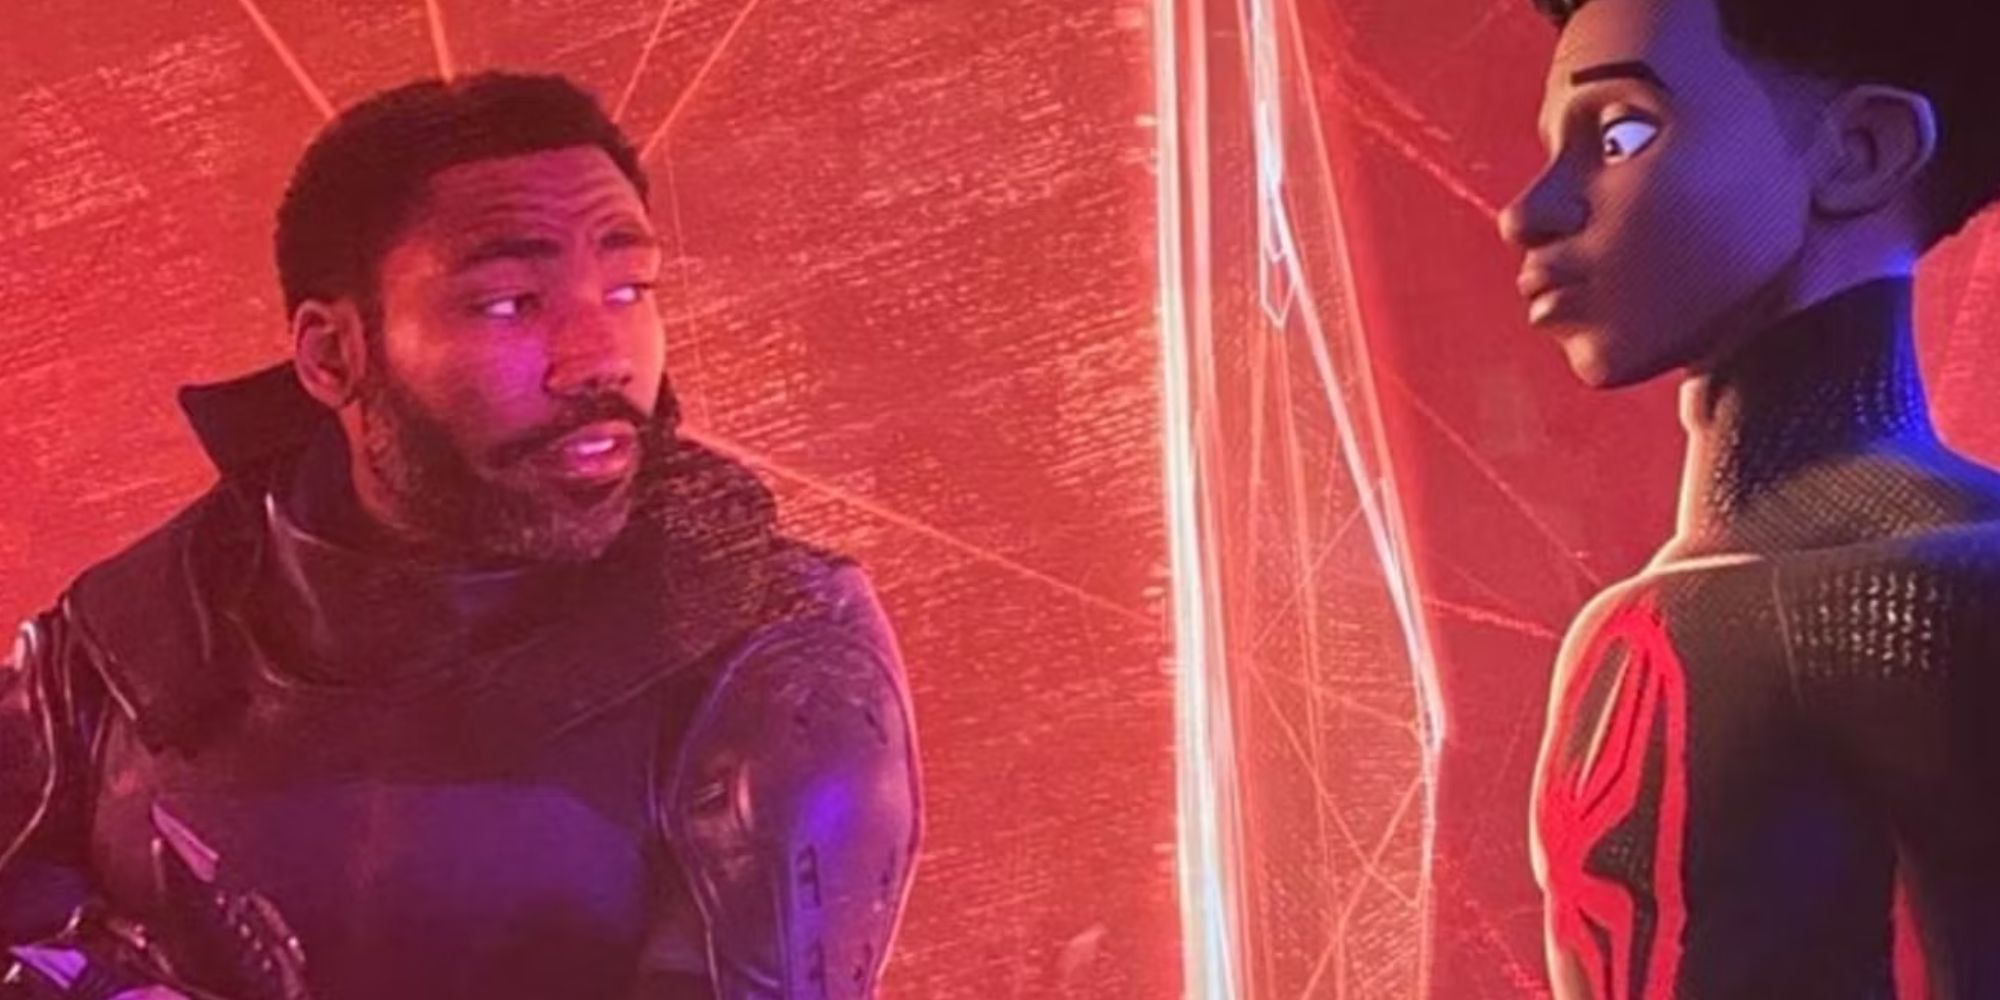 across-the-spider-verse’s-original-donald-glover-cameo-gave-audiences-a-very-different-experience